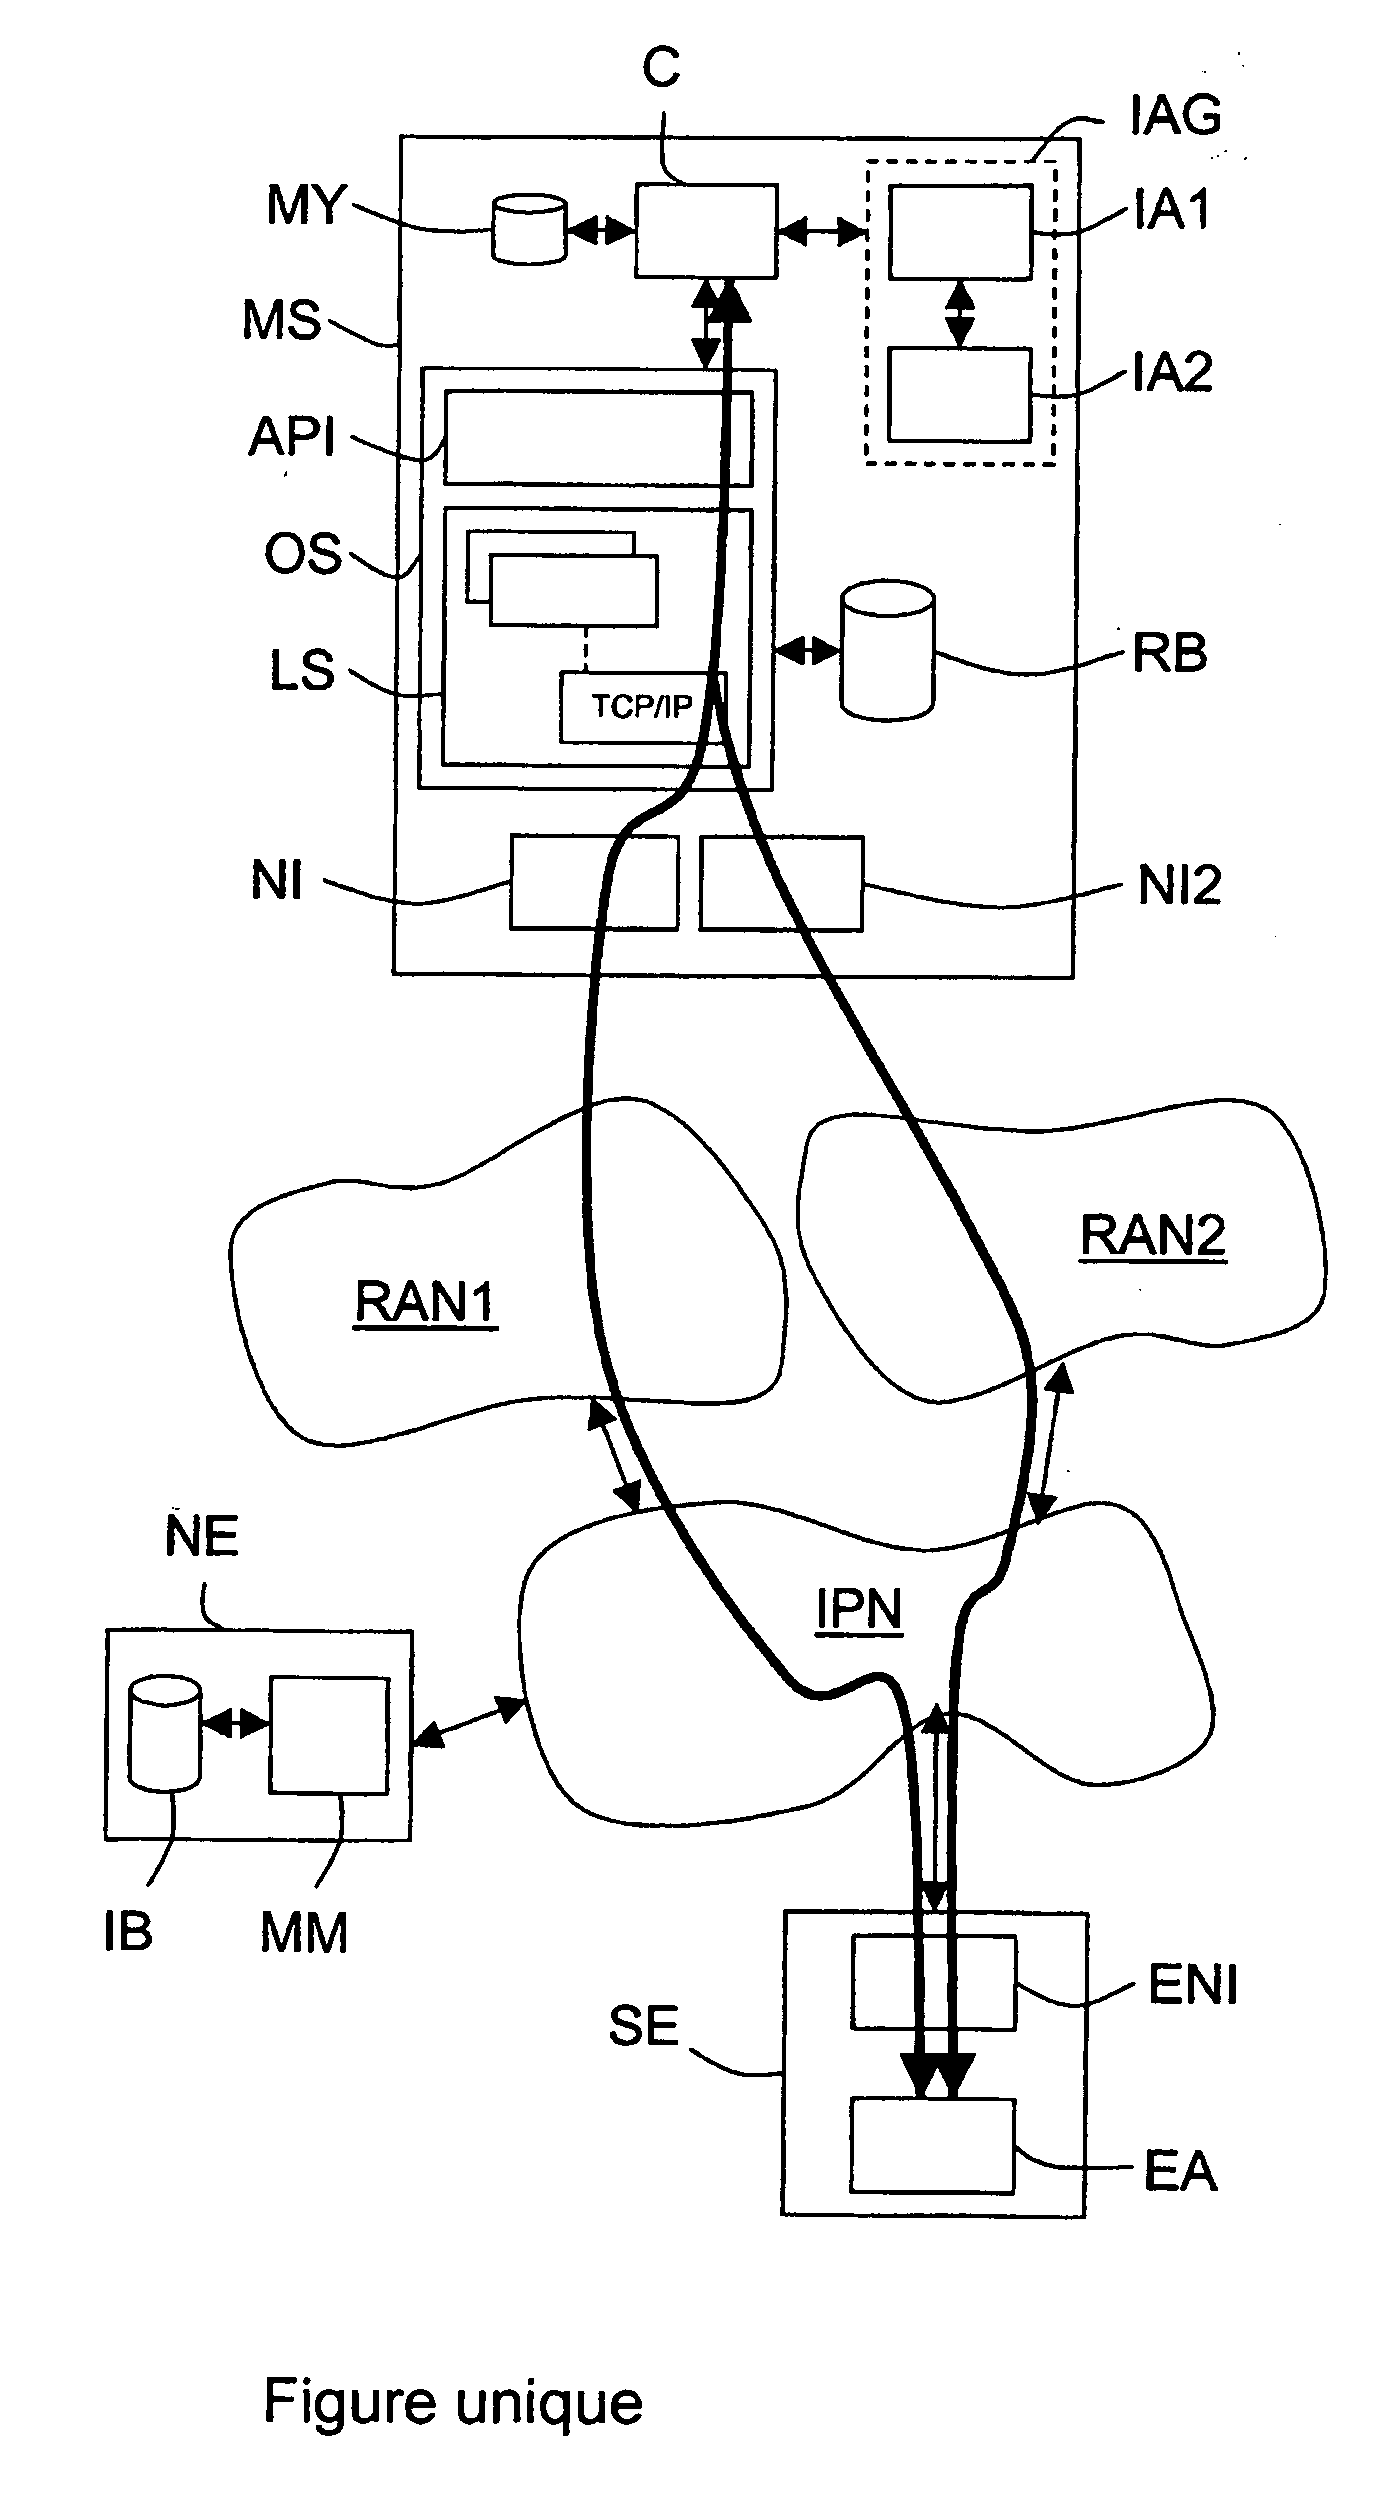 Network equipment for supplying multimode mobile terminals with data necessary for automatically selecting radio access network interfaces during service sessions